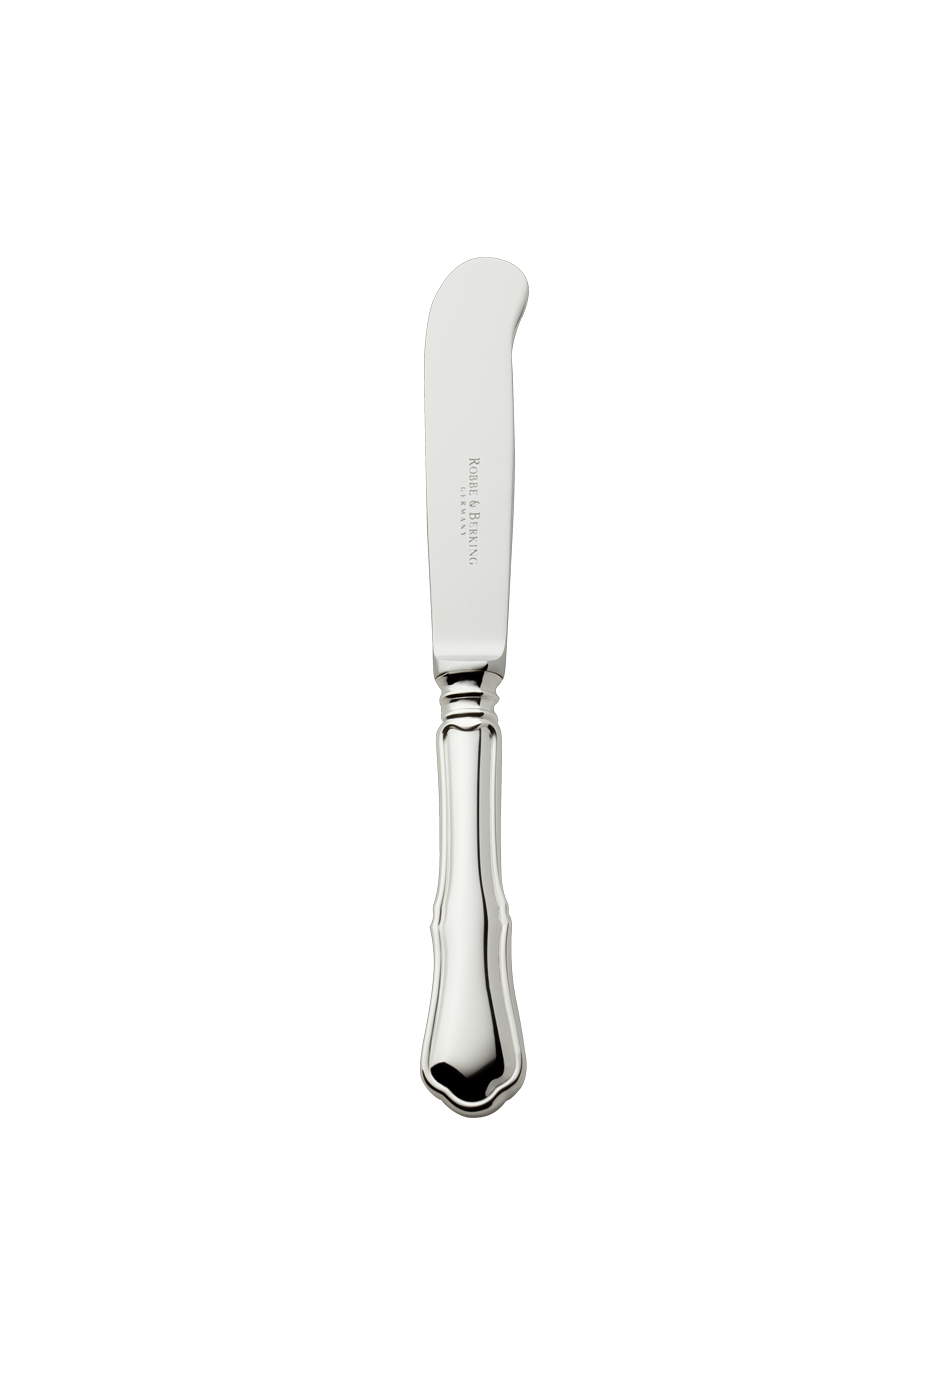 Alt-Chippendale Butter Knife (150g massive silverplated)